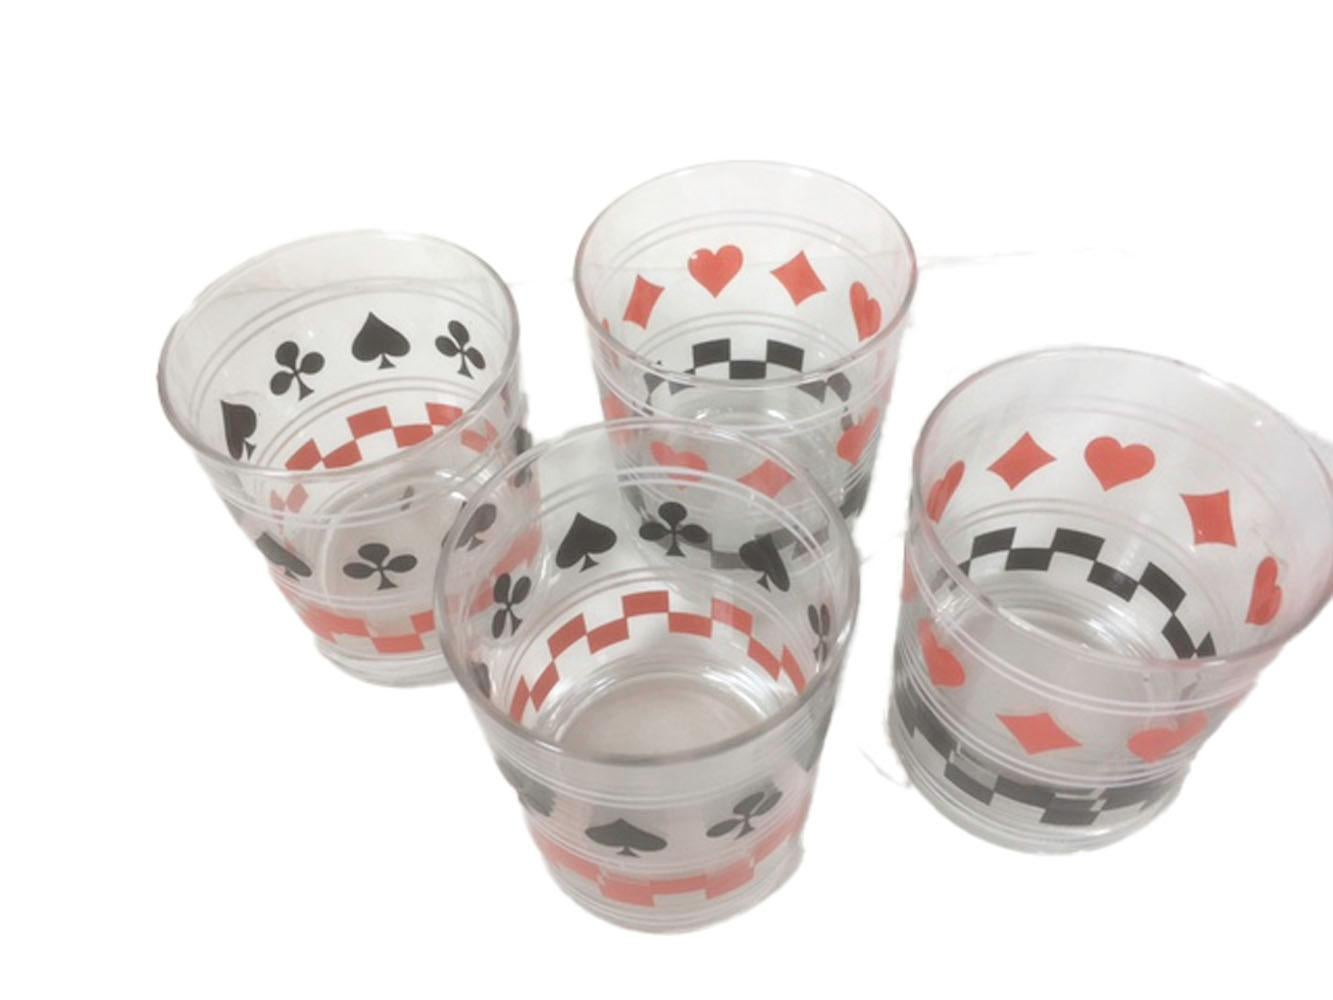 Four French Art Deco Old Fashioned Glasses with Playing Card Graphics In Good Condition For Sale In Nantucket, MA